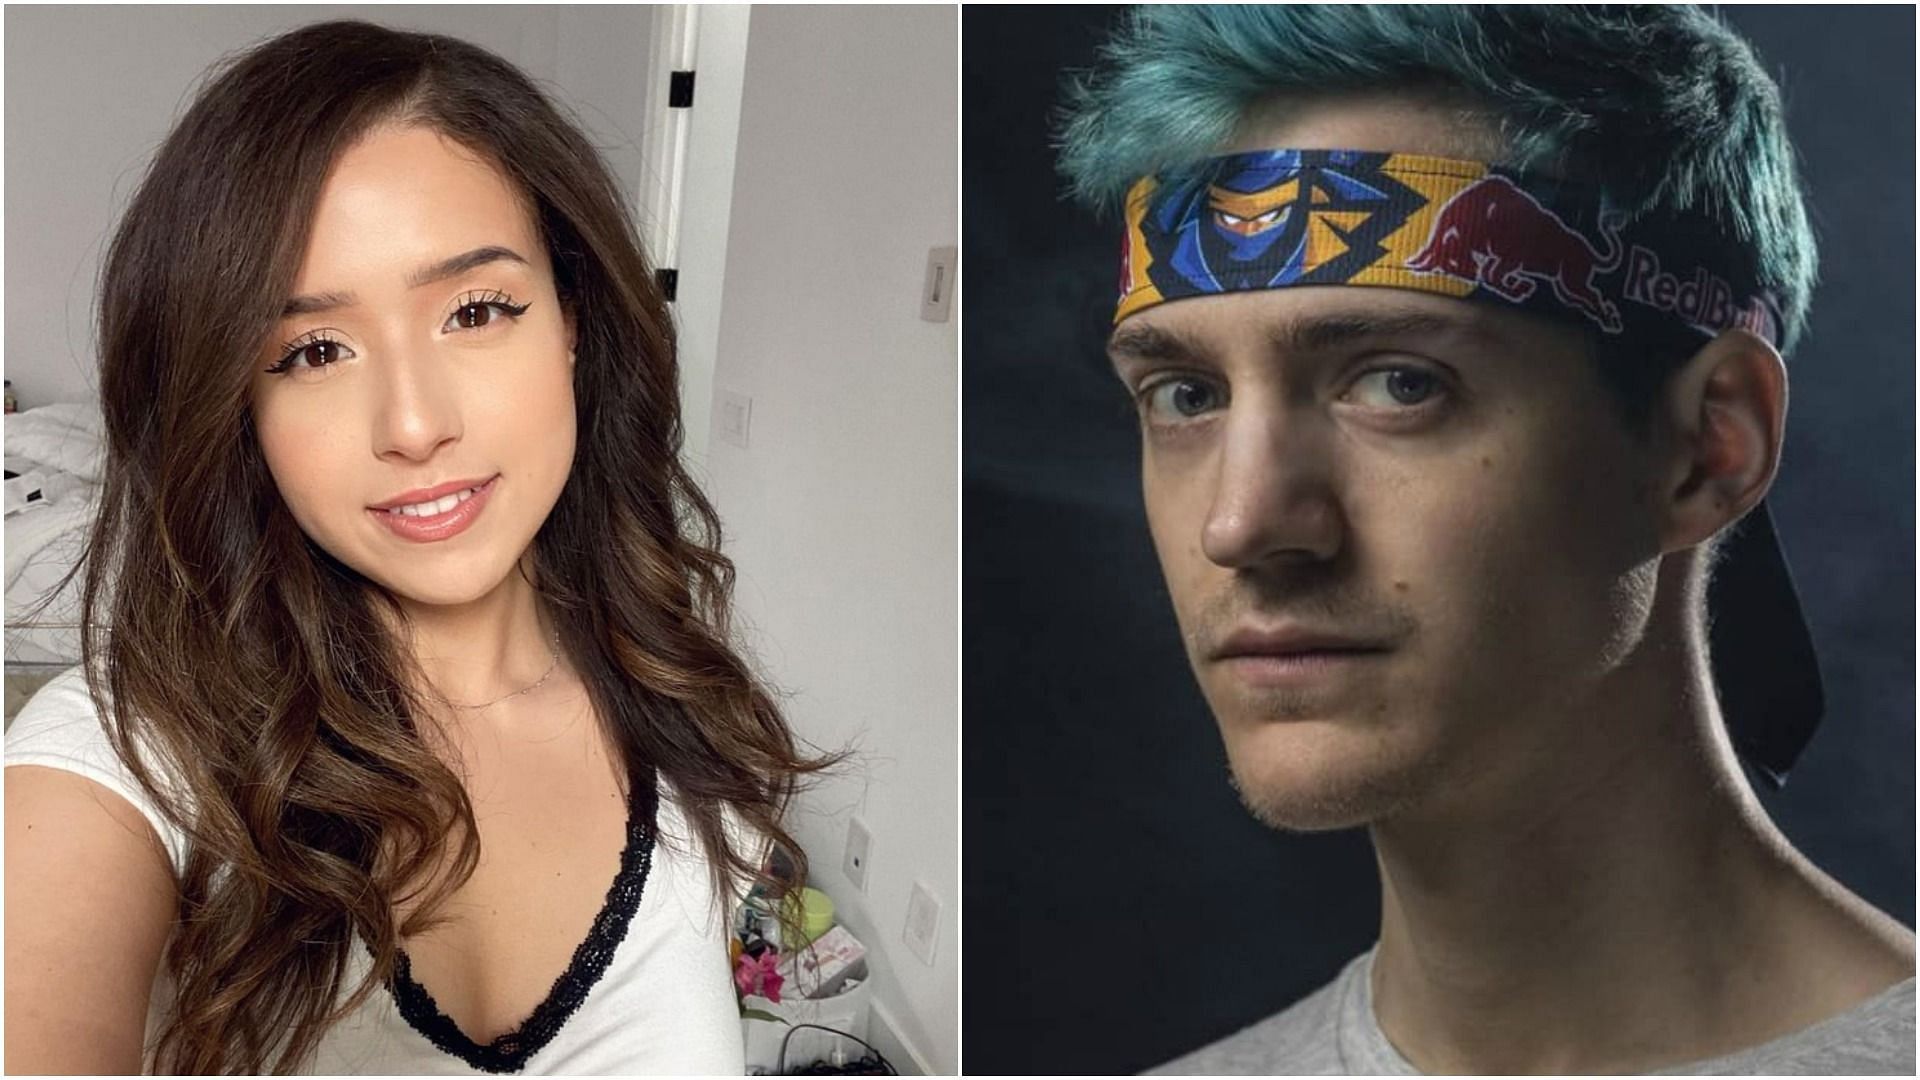 Pokimane calls out Ninja for not doing the bare minimum to distance himself from misogyny (Image via Sportskeeda)